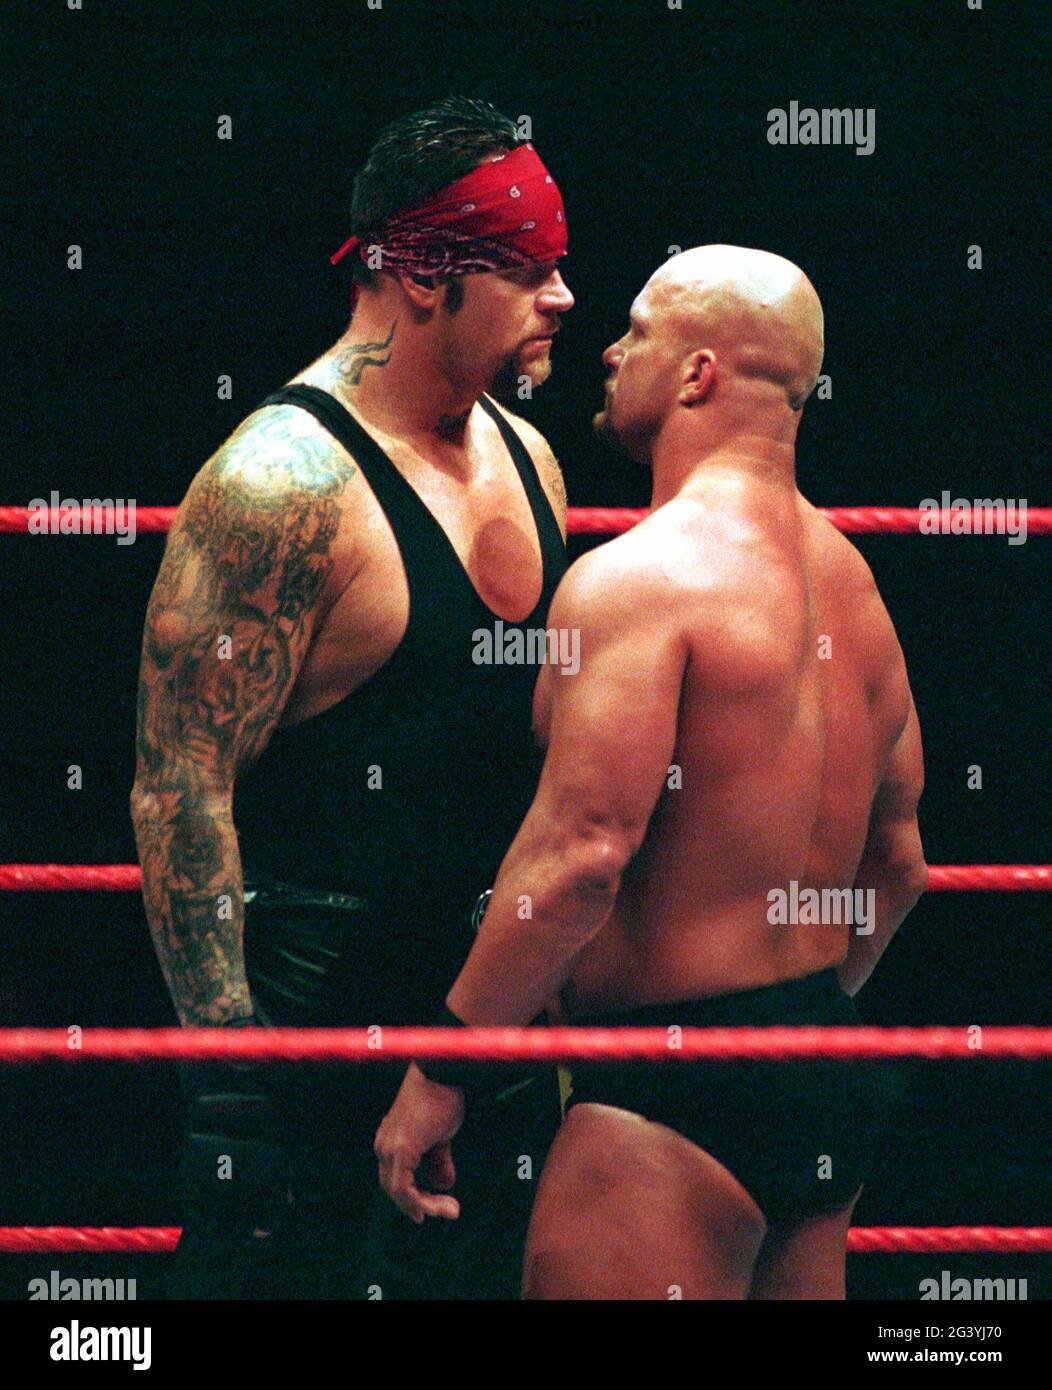 Koelnarena Cologne Germany 1.5.2002, Professional Wrestling: WWF  Road to Insurrextion — 'Stone Cold' Steve Austin (right), and the 'Undertaker' Stock Photo